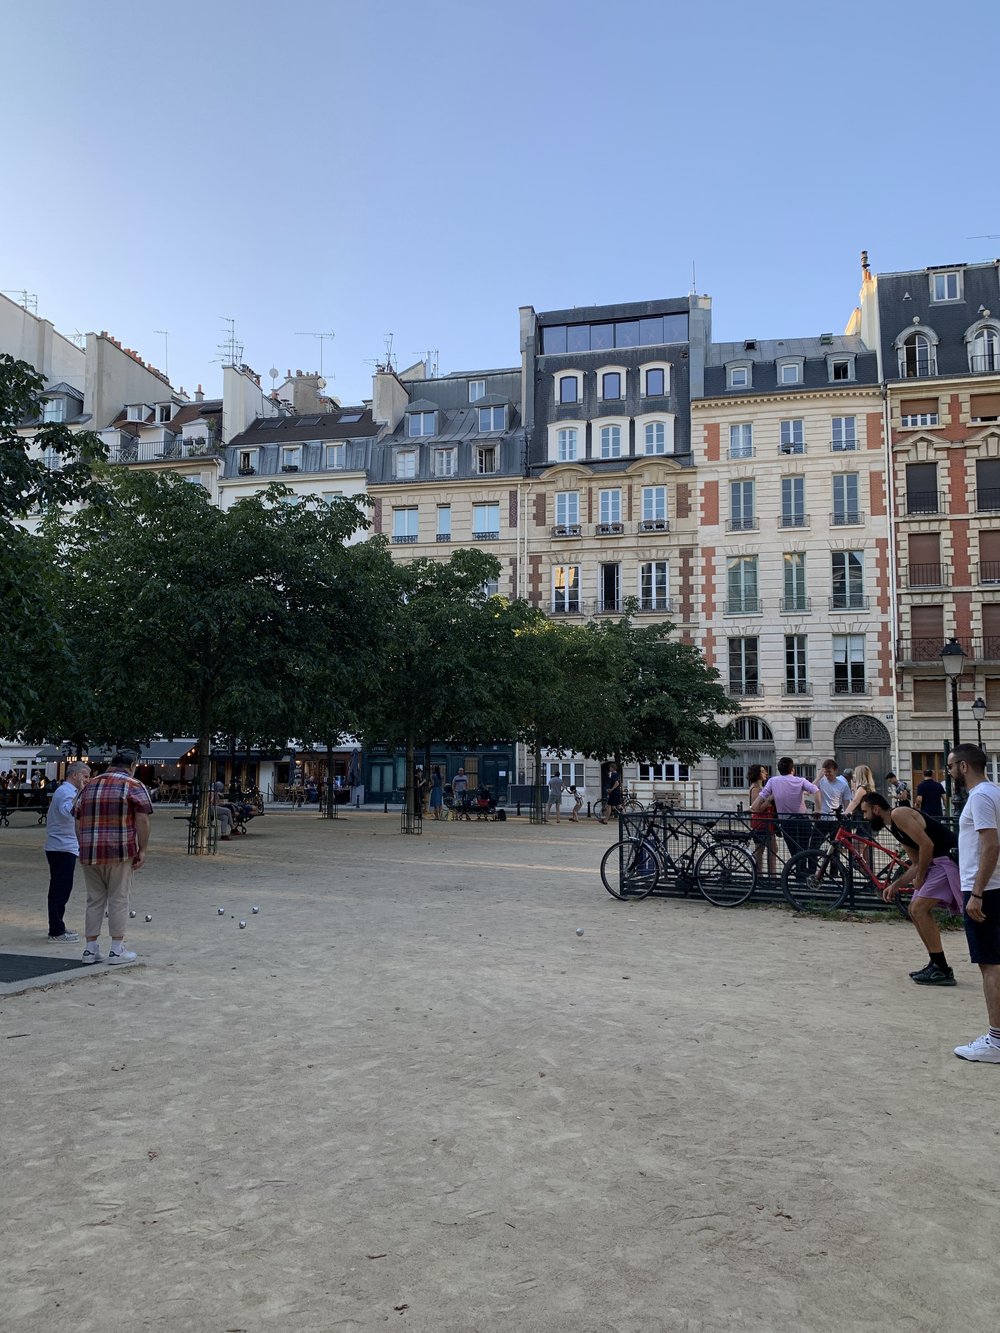 Playing Pétanque at Place Dauphine